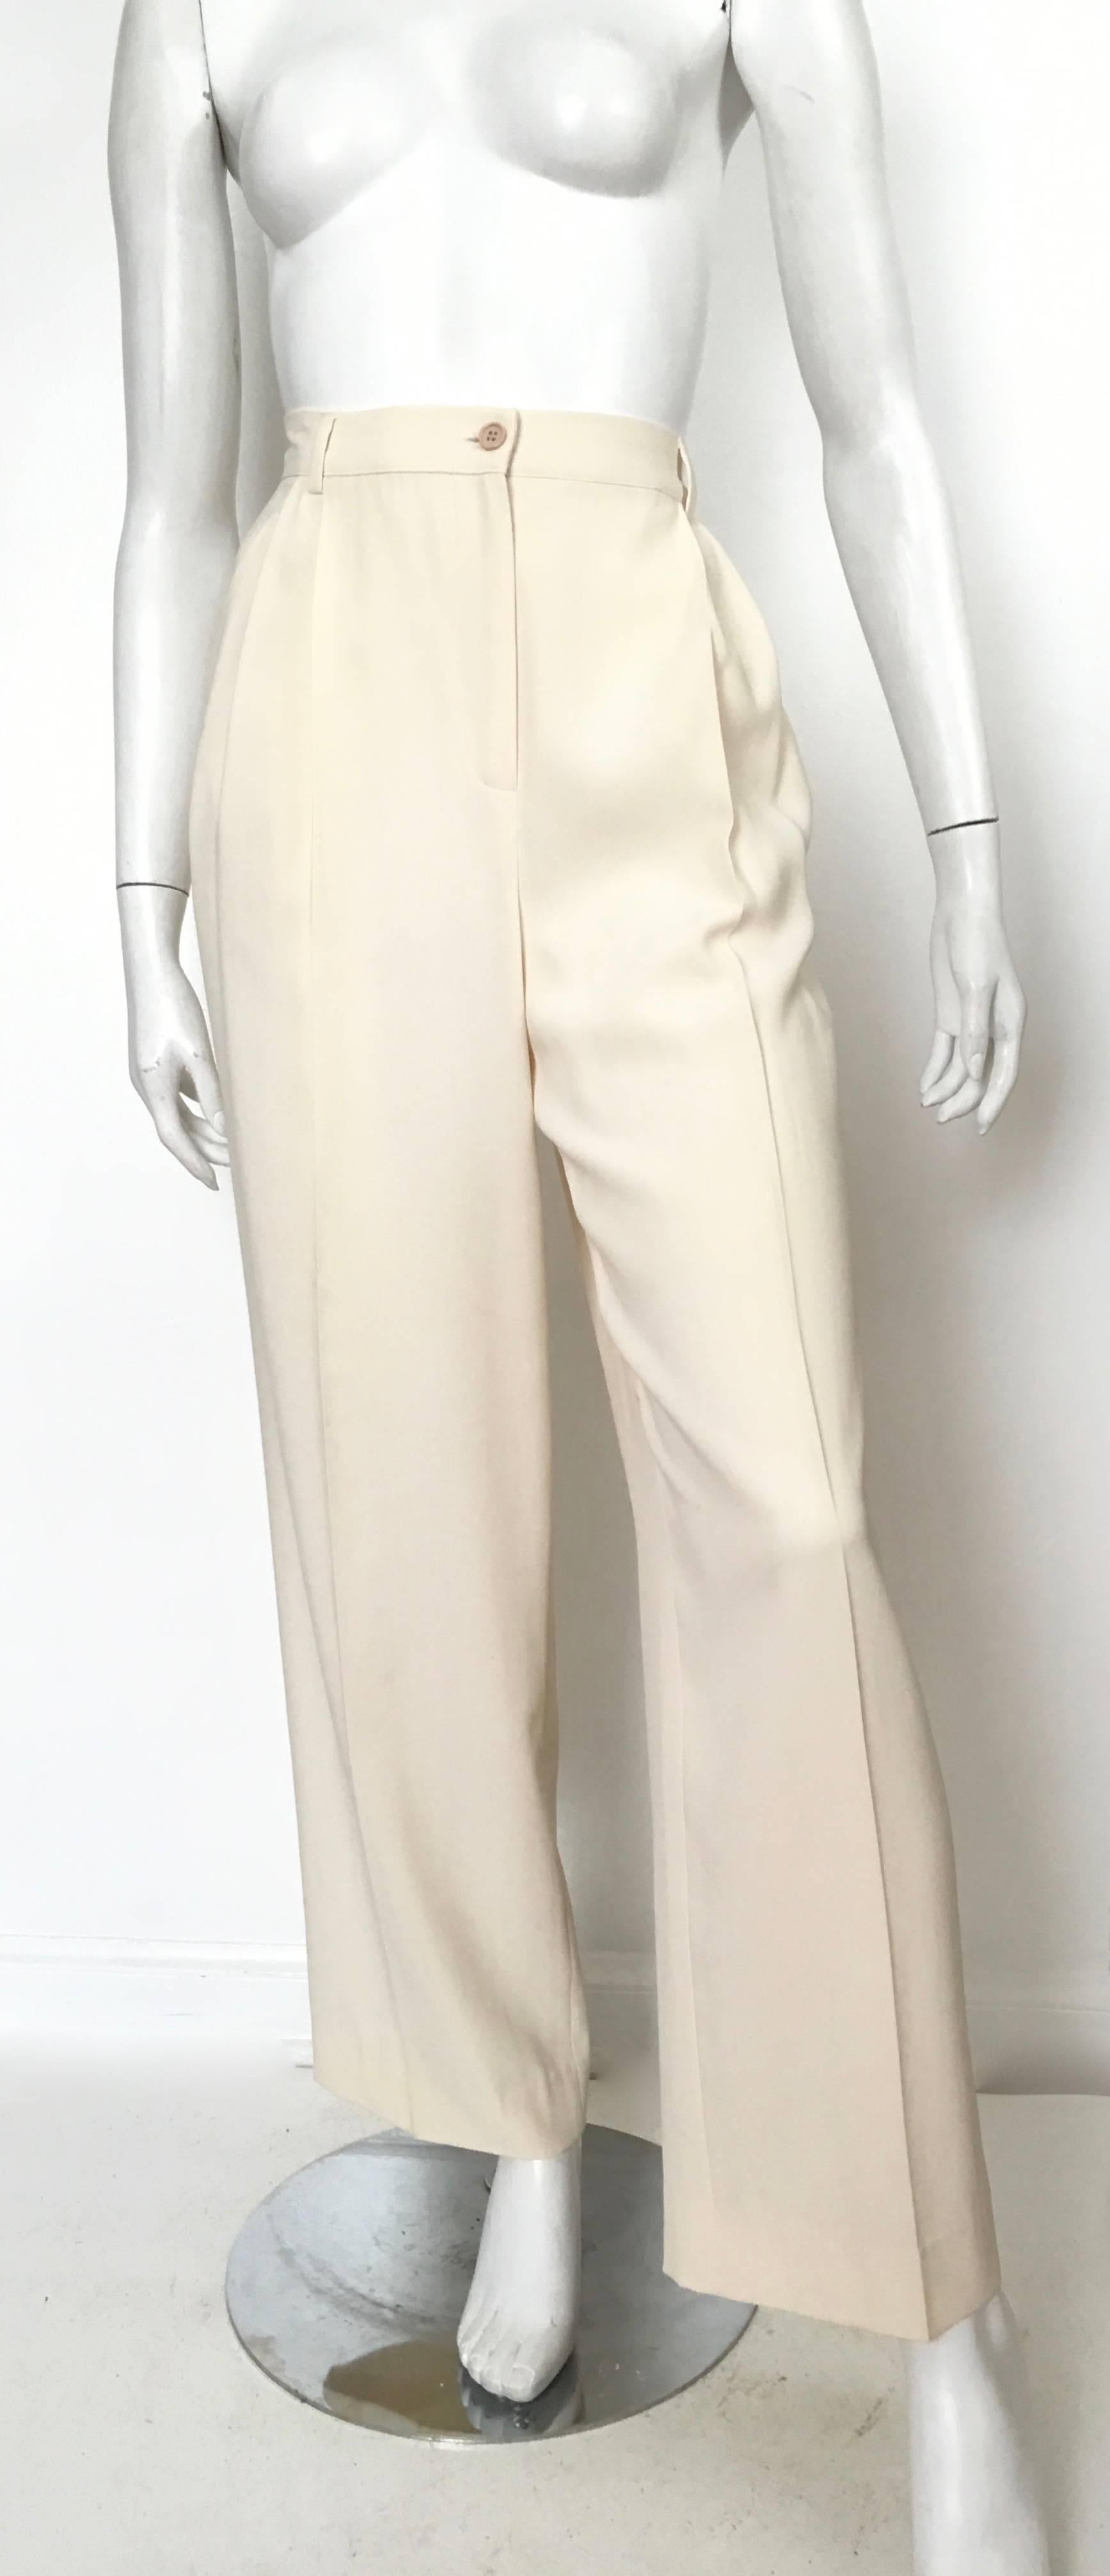 Valentino Miss V 1990s classic cream color pleated pants with pockets is labeled a size 12 but fits like a modern USA size 8.  Ladies please grab your trusted friend, Mr. Tape Measure, so you can measure your waist, hips & inseam to make certain